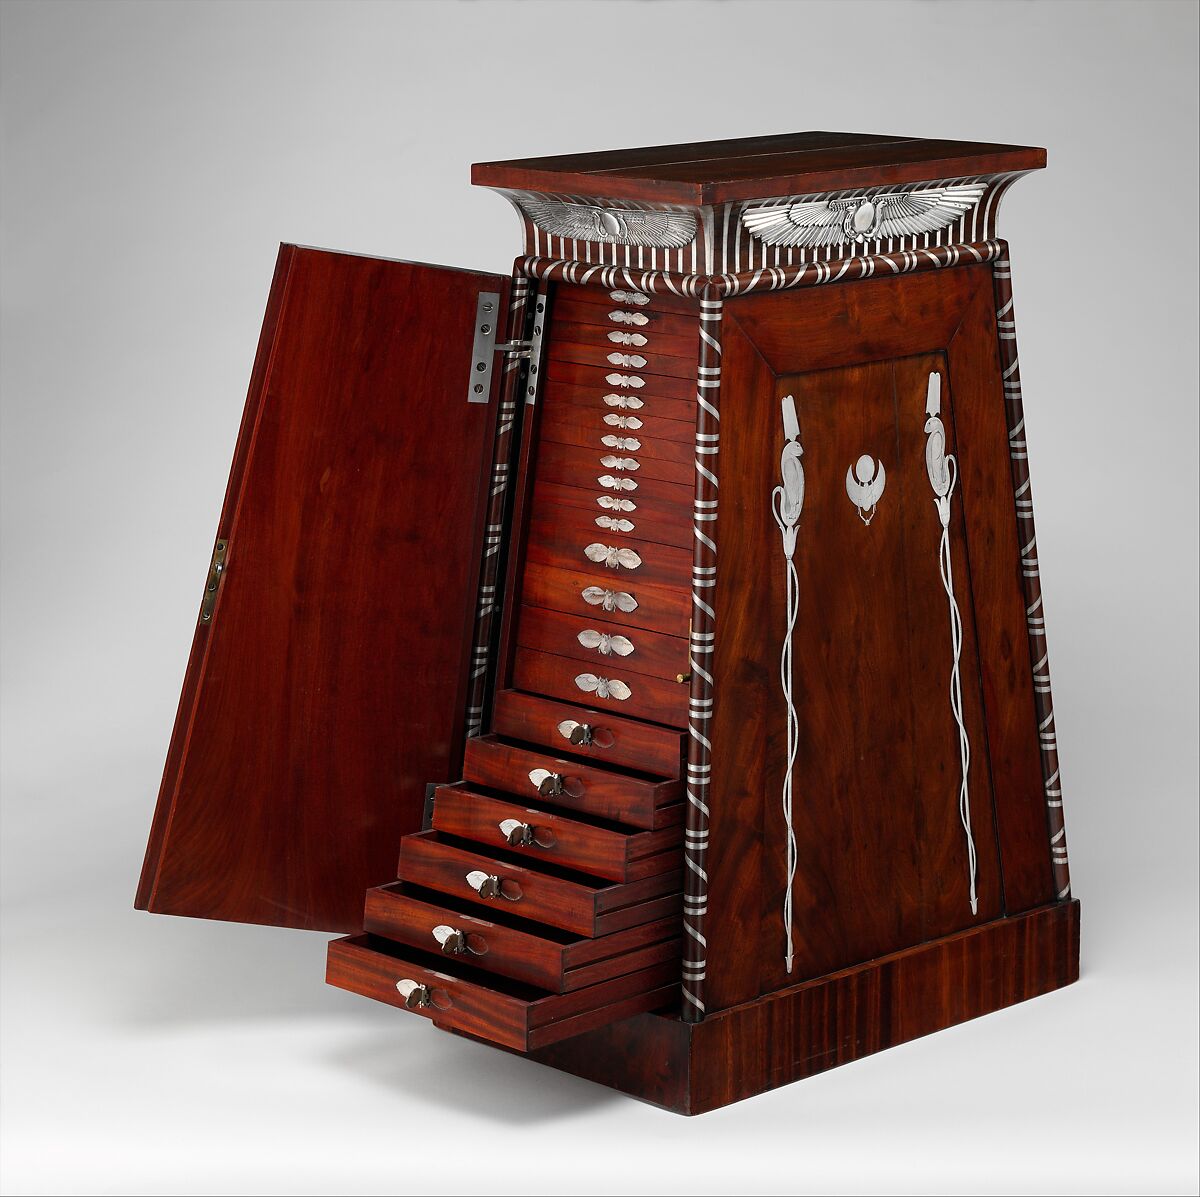 Coin cabinet, Designed by Charles Percier (French, Paris 1764–1838 Paris), Mahogany (probably Swietenia mahagoni), applied and inlaid silver, French, Paris 